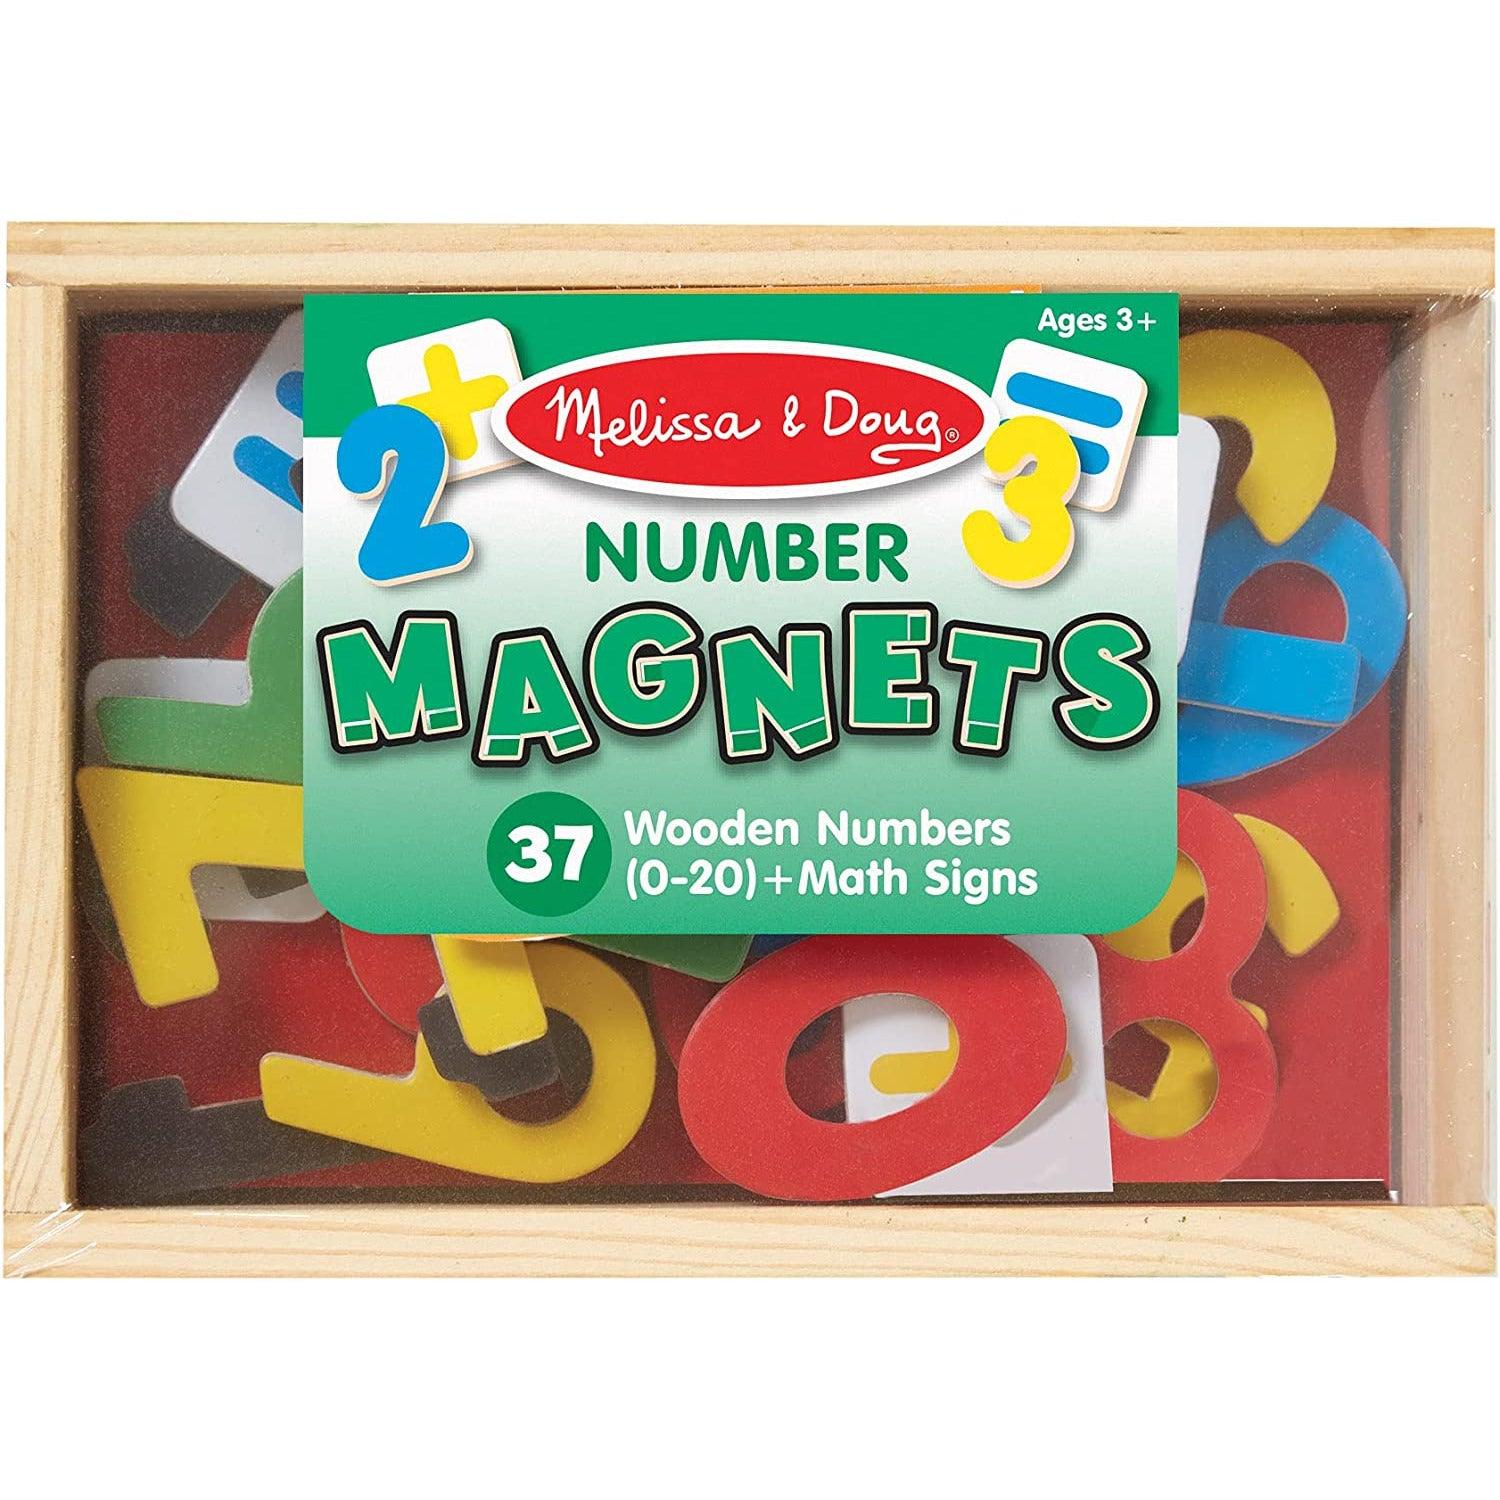 Melissa & Doug 37 Wooden Number Magnets in a Box - BumbleToys - 2-4 Years, Blackboards & Easels, Boys, Cecil, Girls, Mumerz